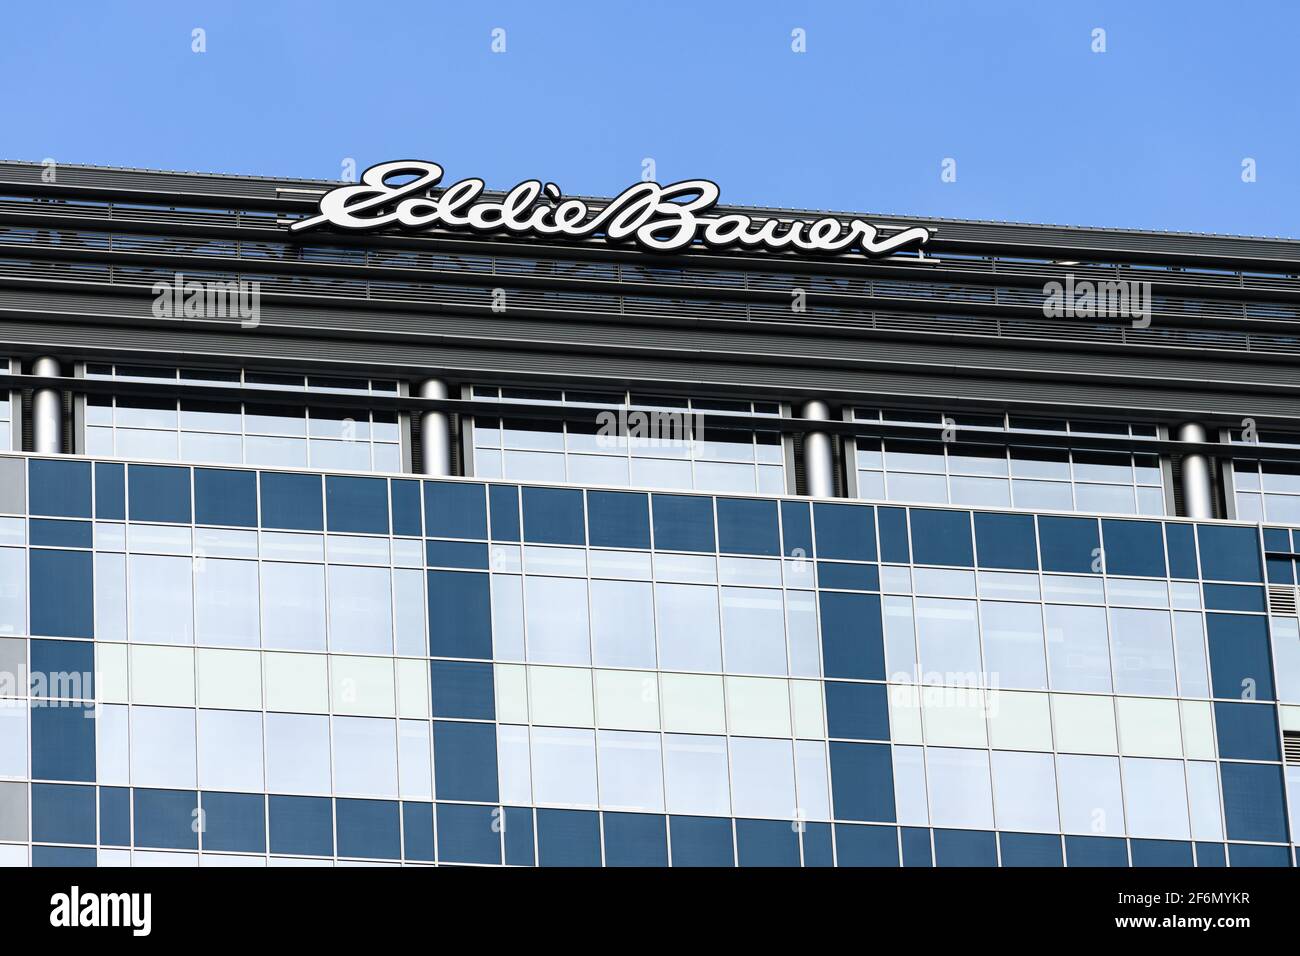 Bellevue, WA, USA - March 30, 2021; Logo on the heaquarters buikding of Eddie Bauer in Bellevue, Washington State Stock Photo